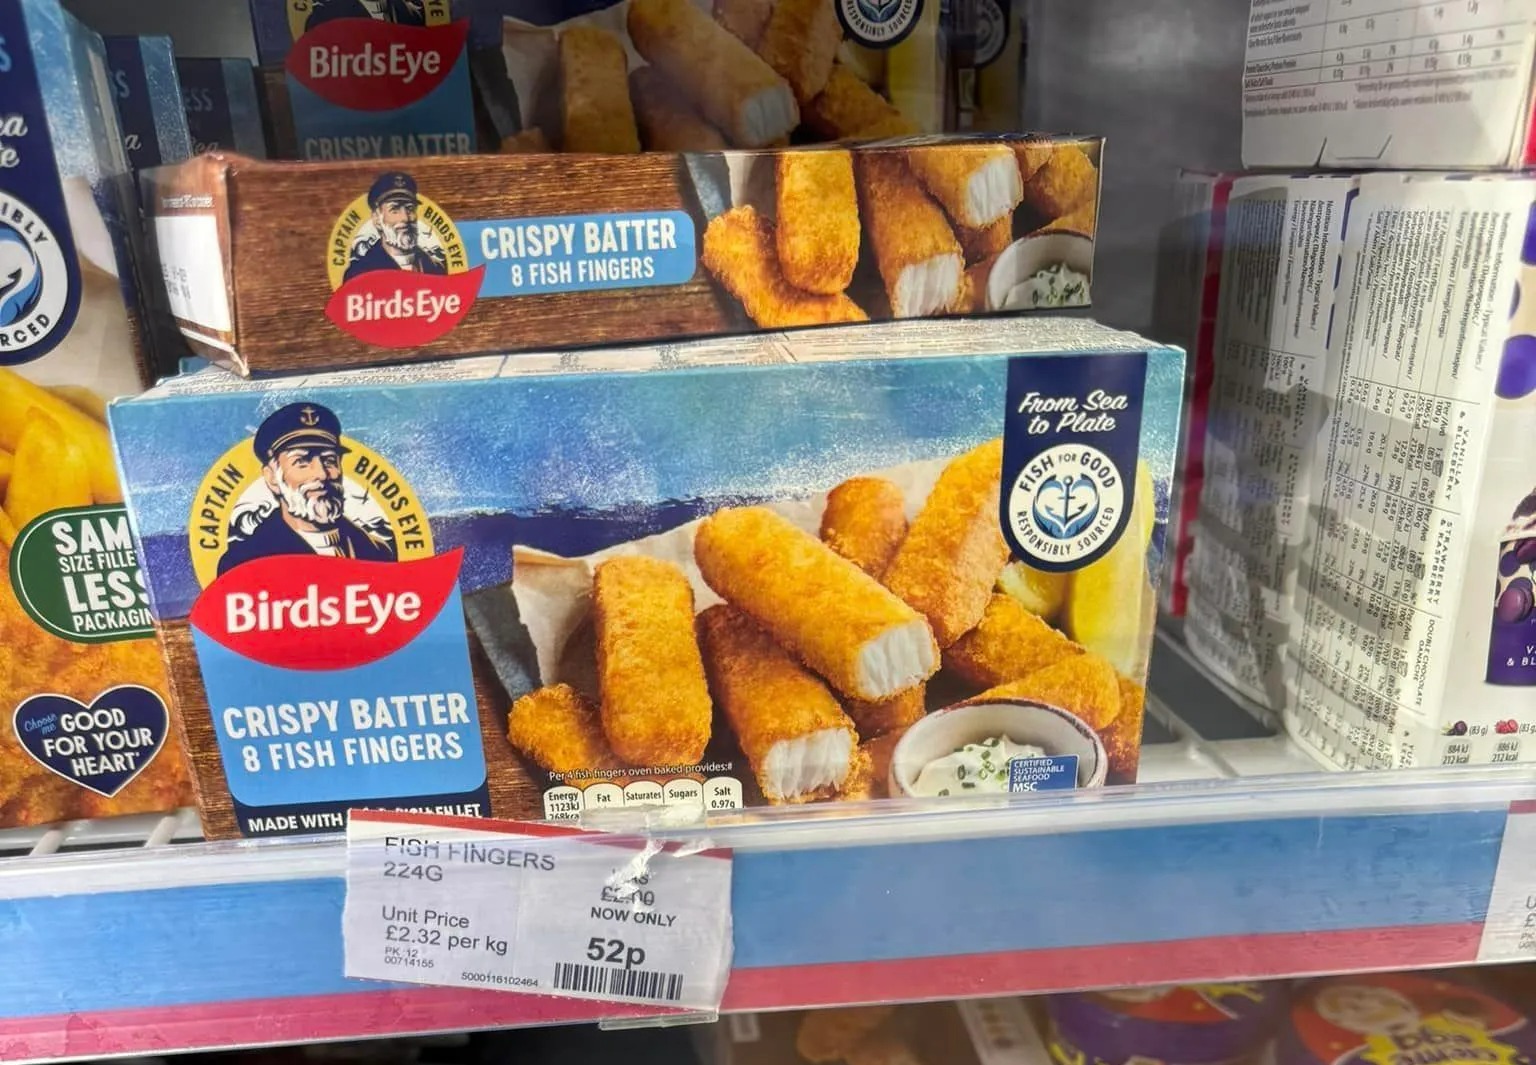 Birds Eye Fish Fingers have been spotted selling for just £52p at Co-op